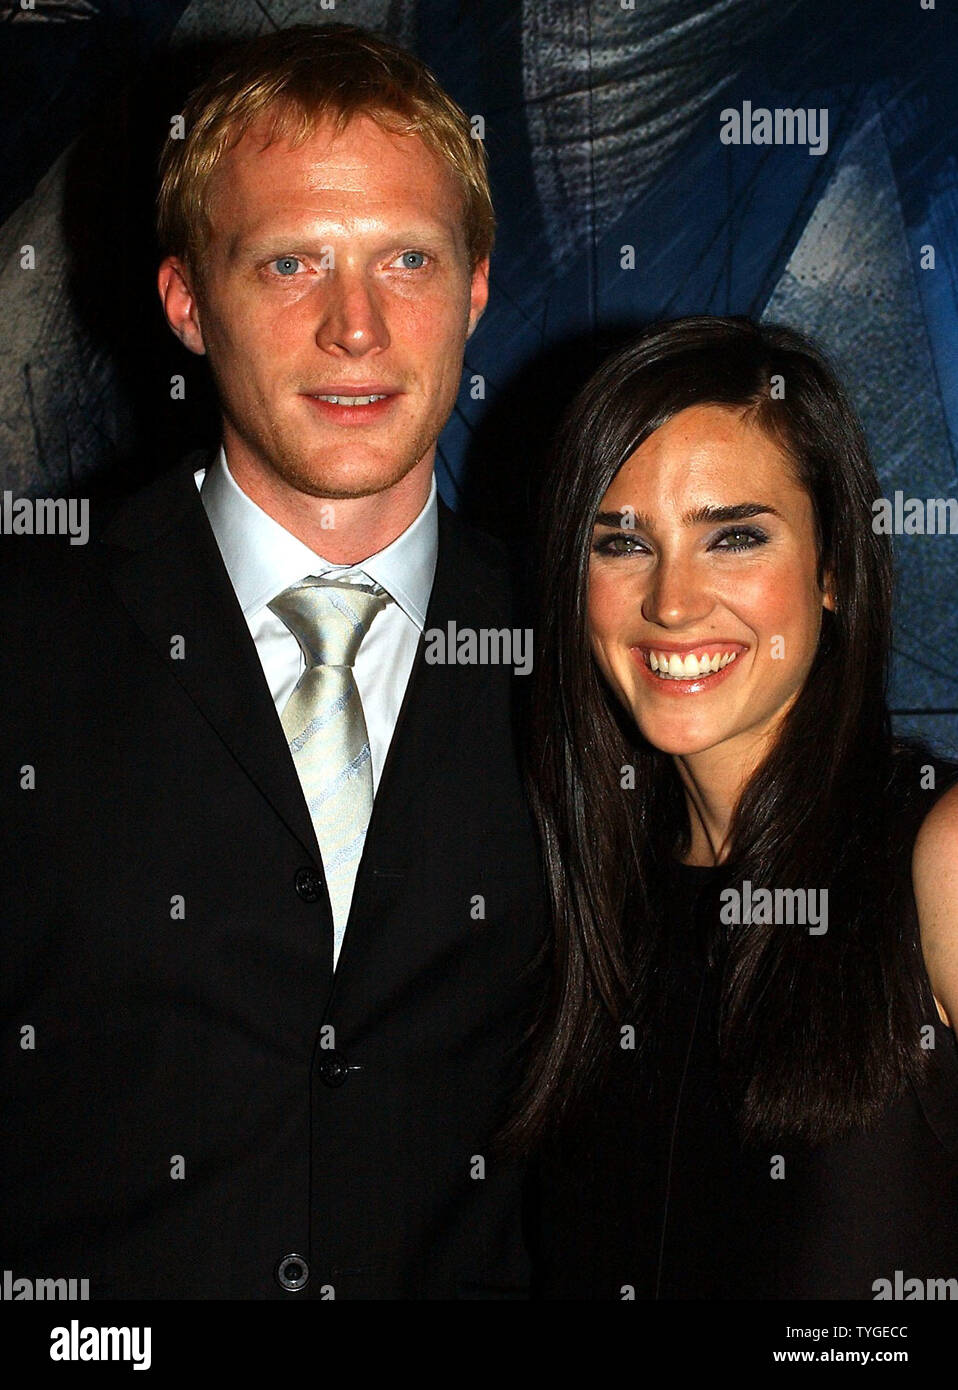 Inside Jennifer Connelly and Paul Bettany's relationship – how 9/11 brought  them together